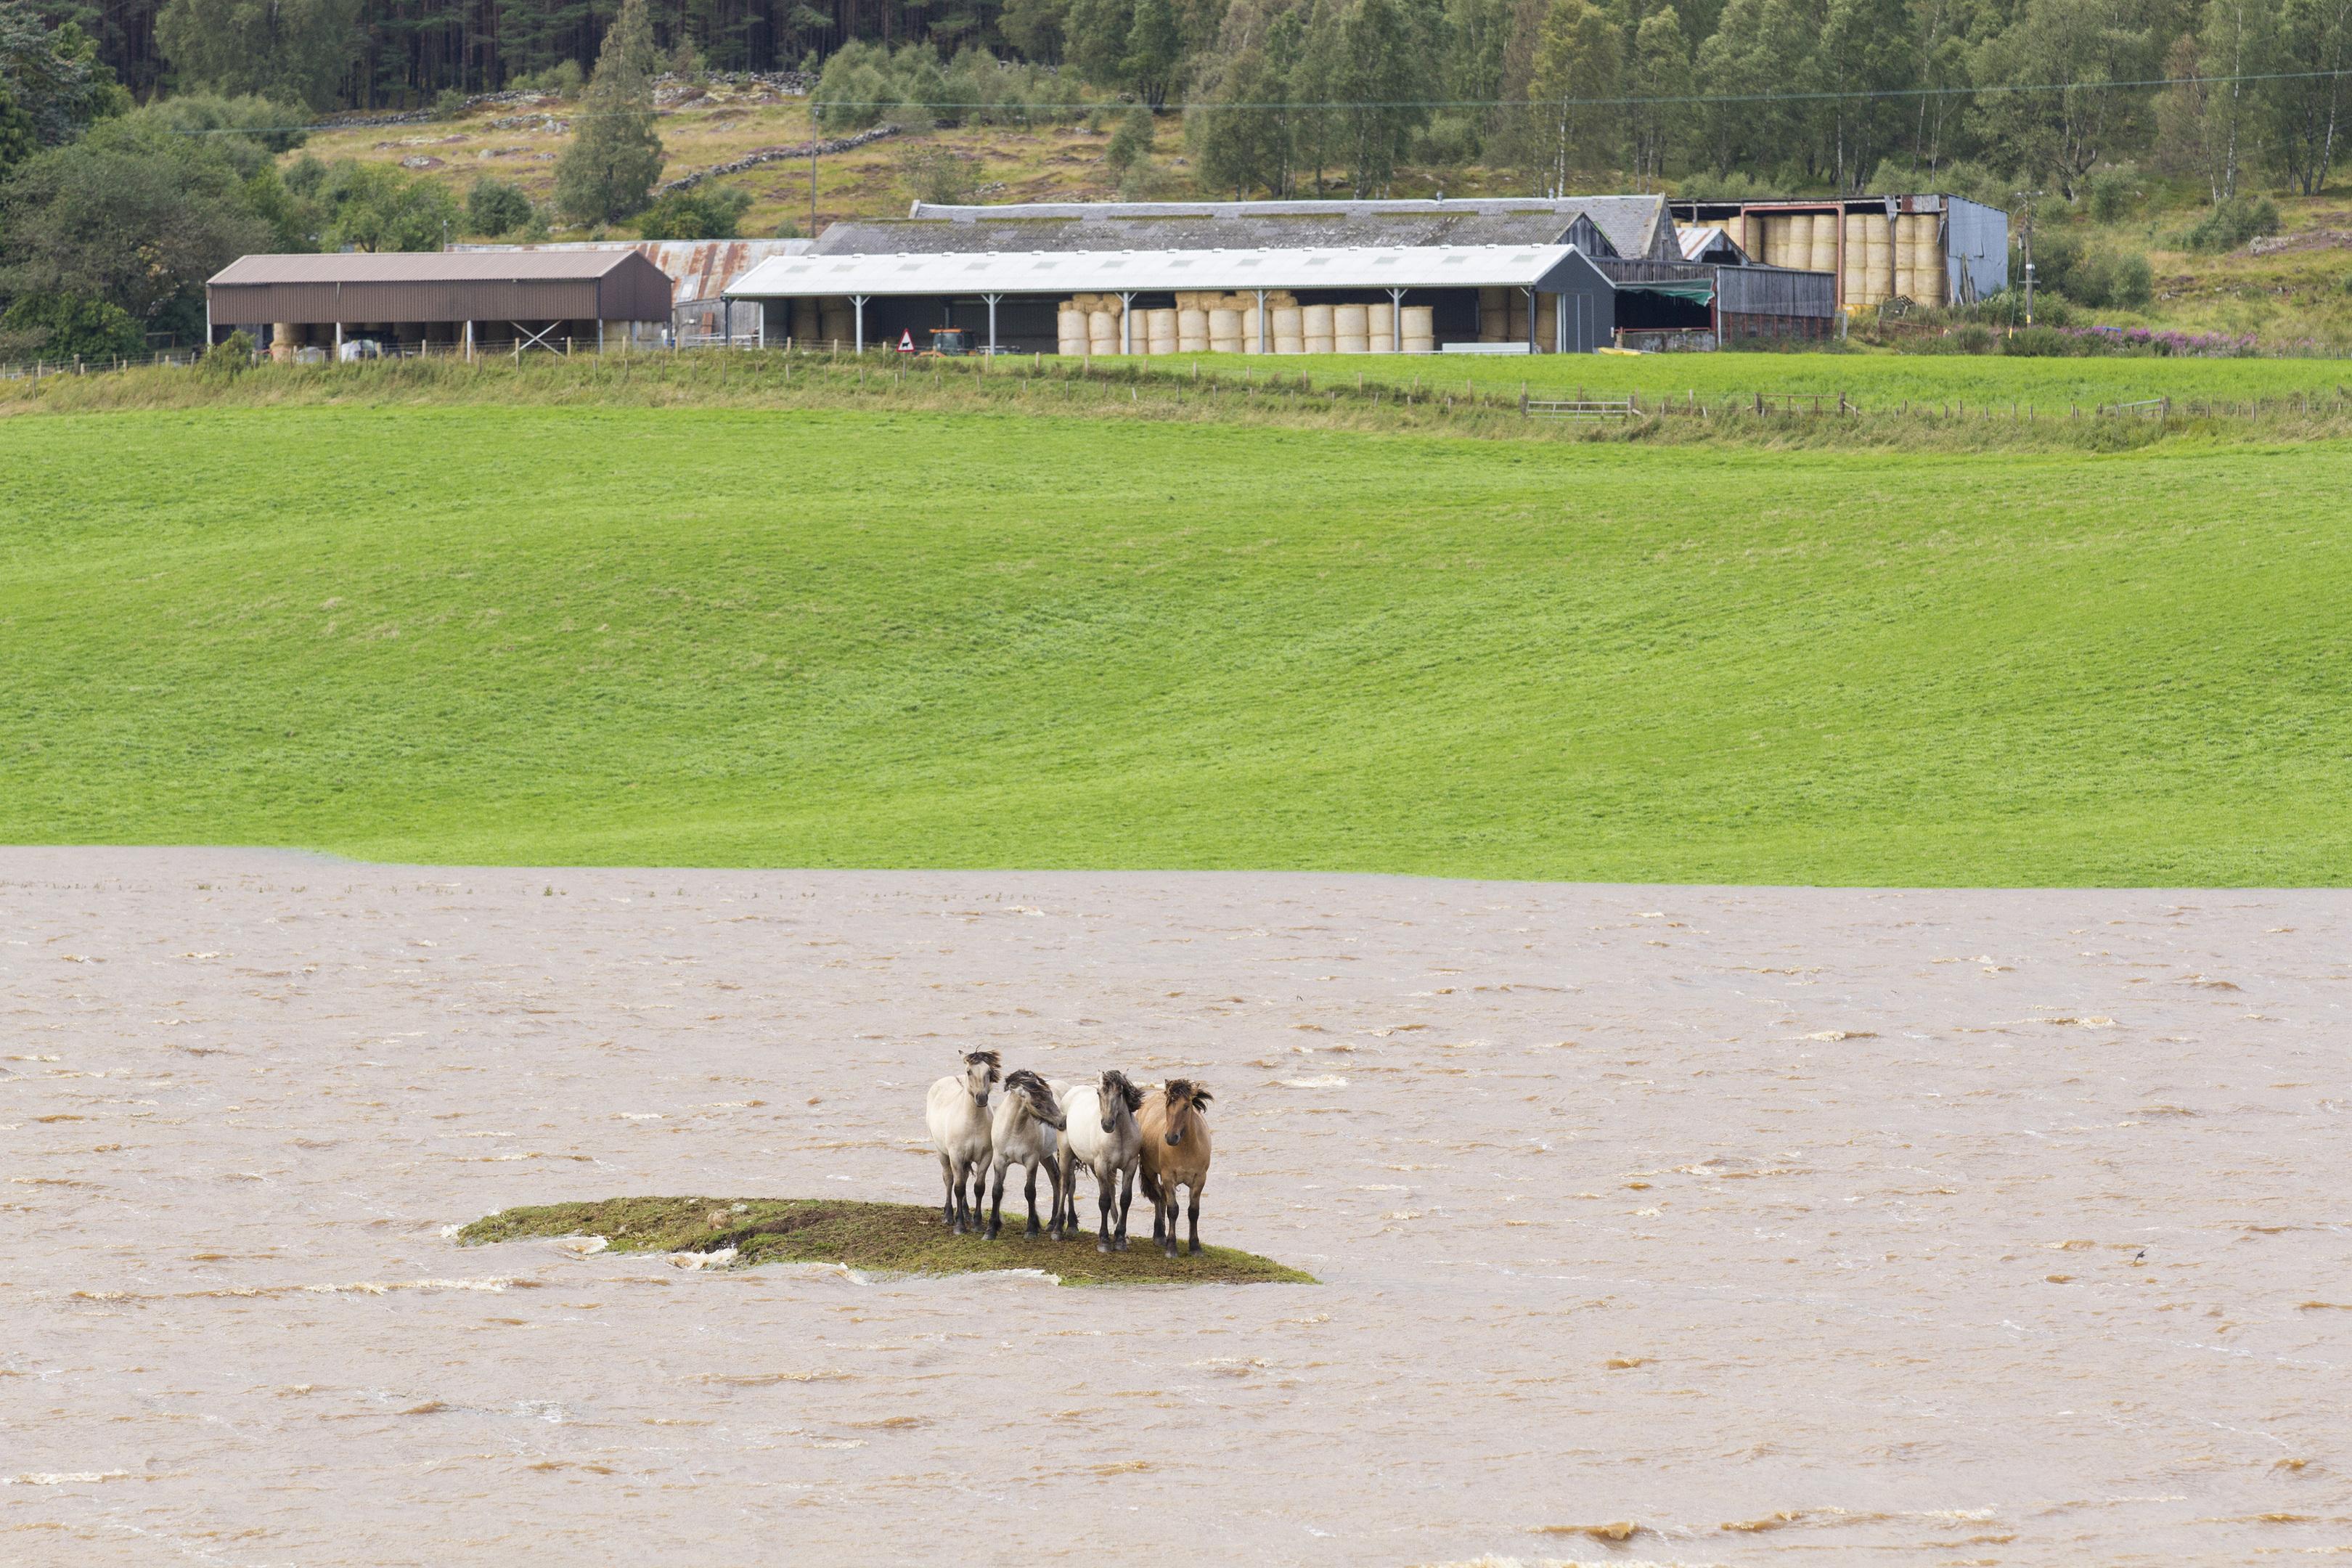 Horses stranded on a tiny island created by flooding at Carrbrdge. Picture by Mark Hamblin